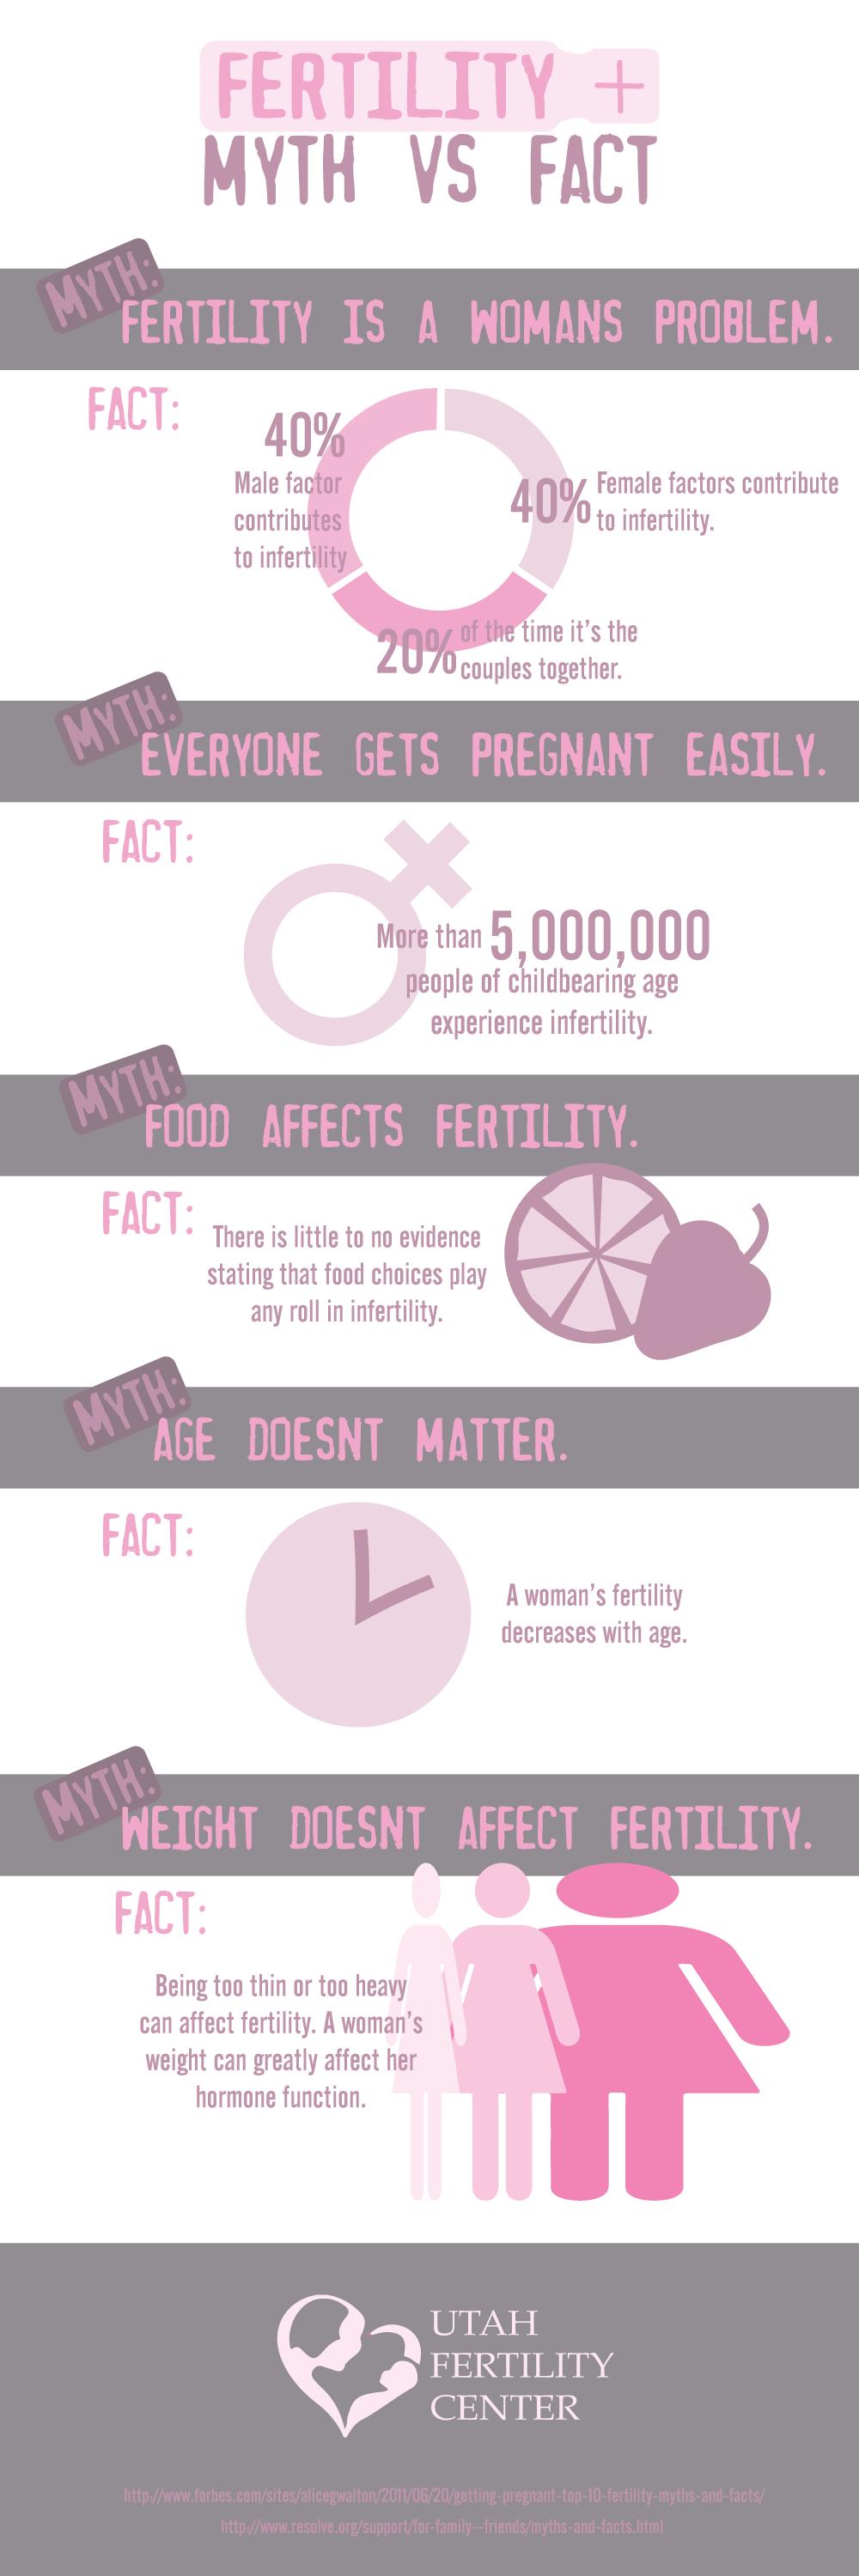 Fertility Myths vs Facts: The Truth About Getting Pregnant 